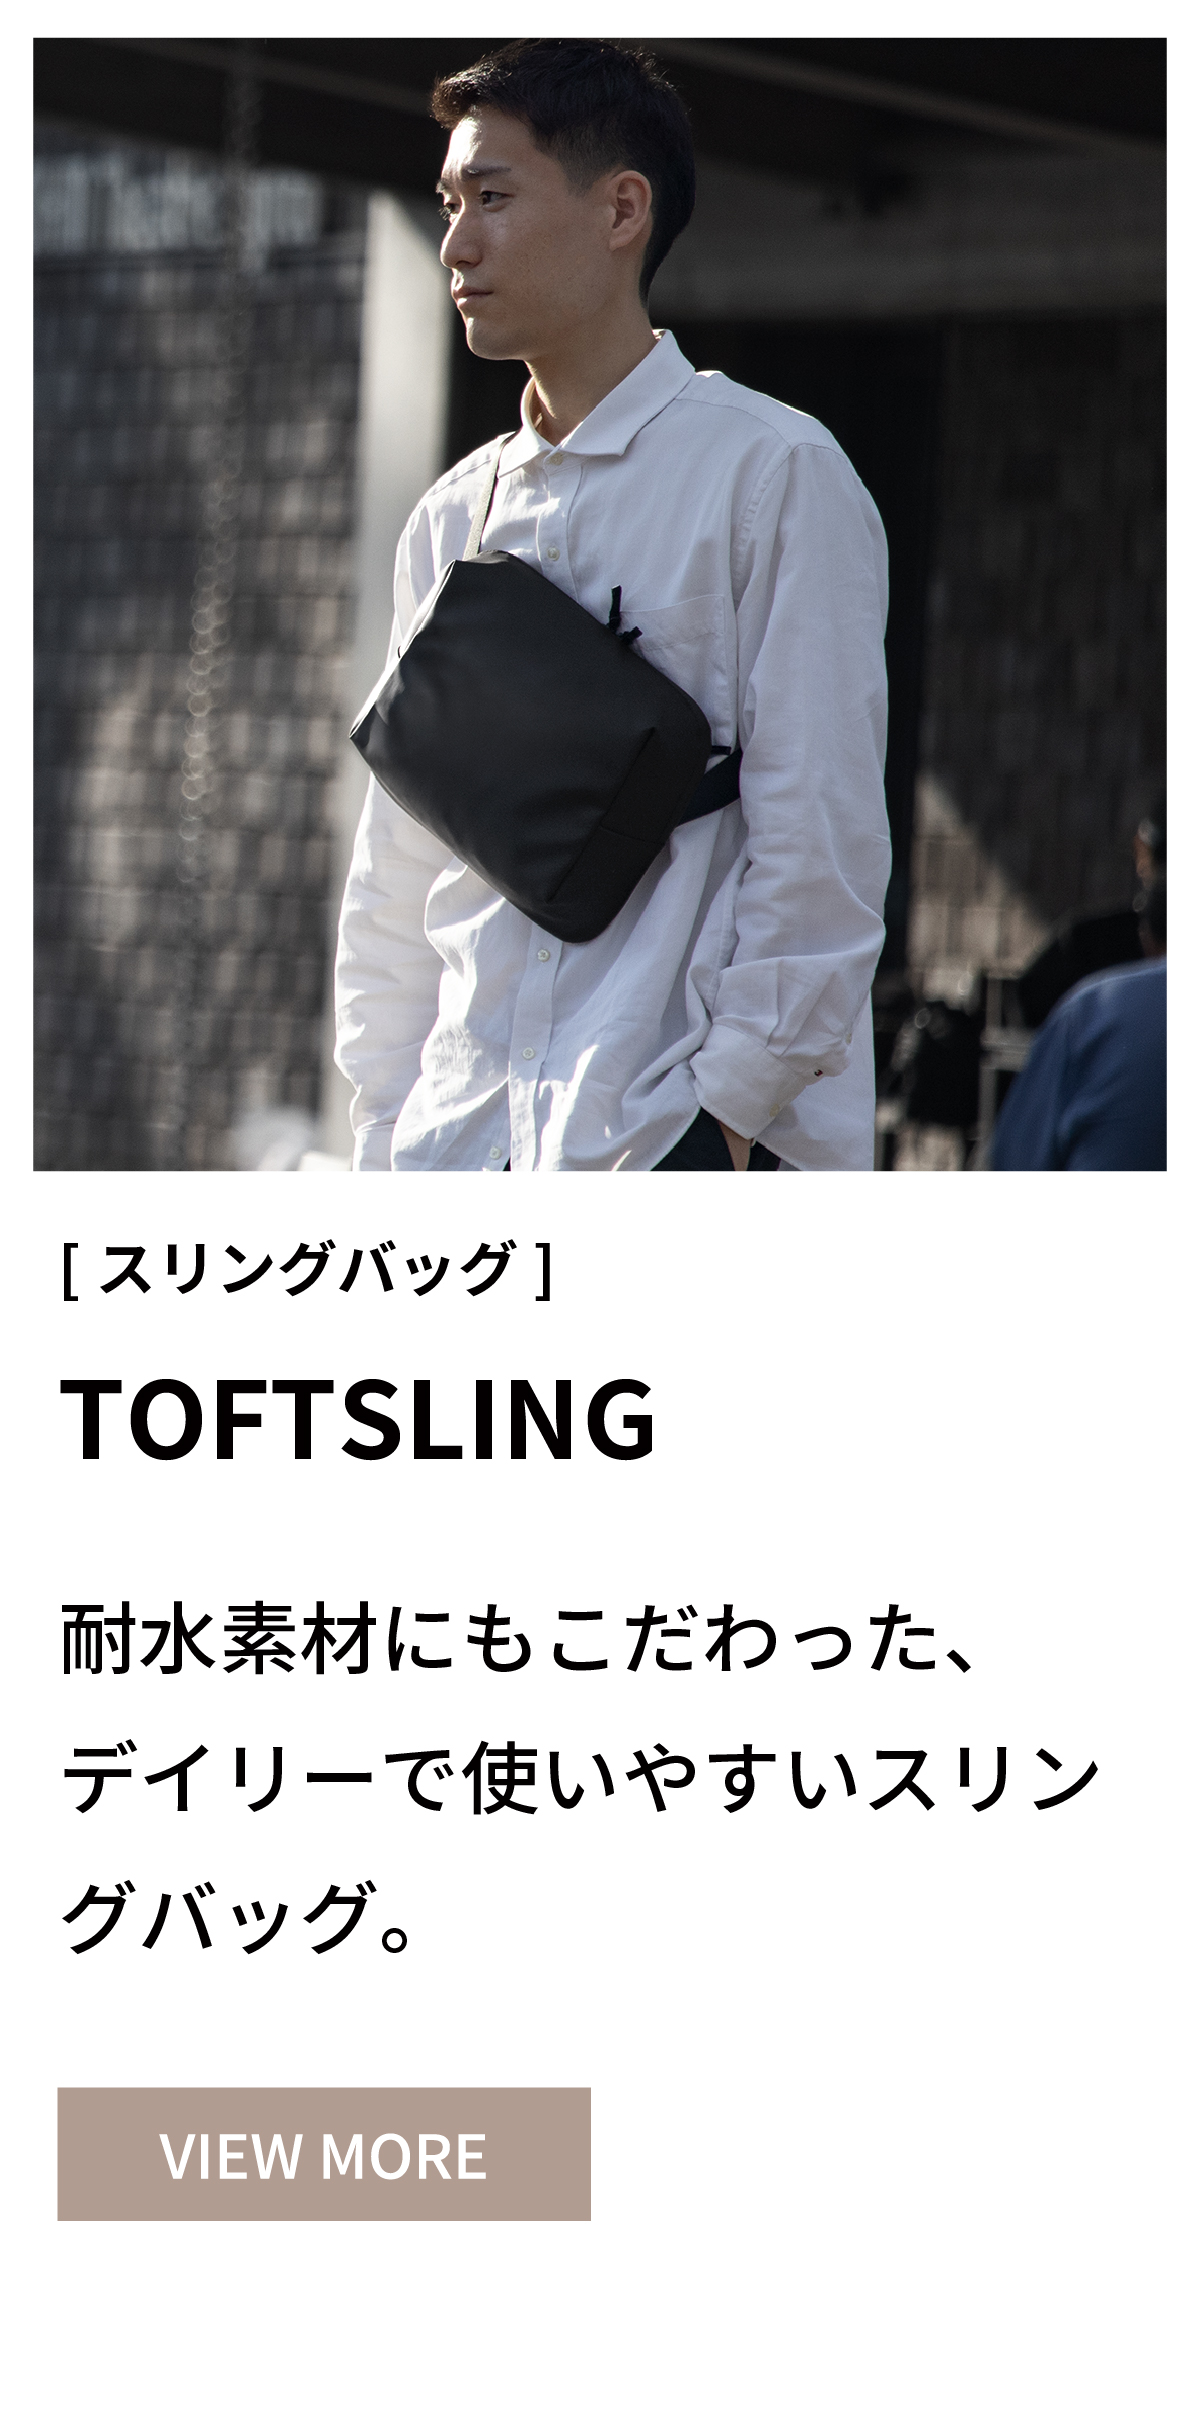 TOFTSLING